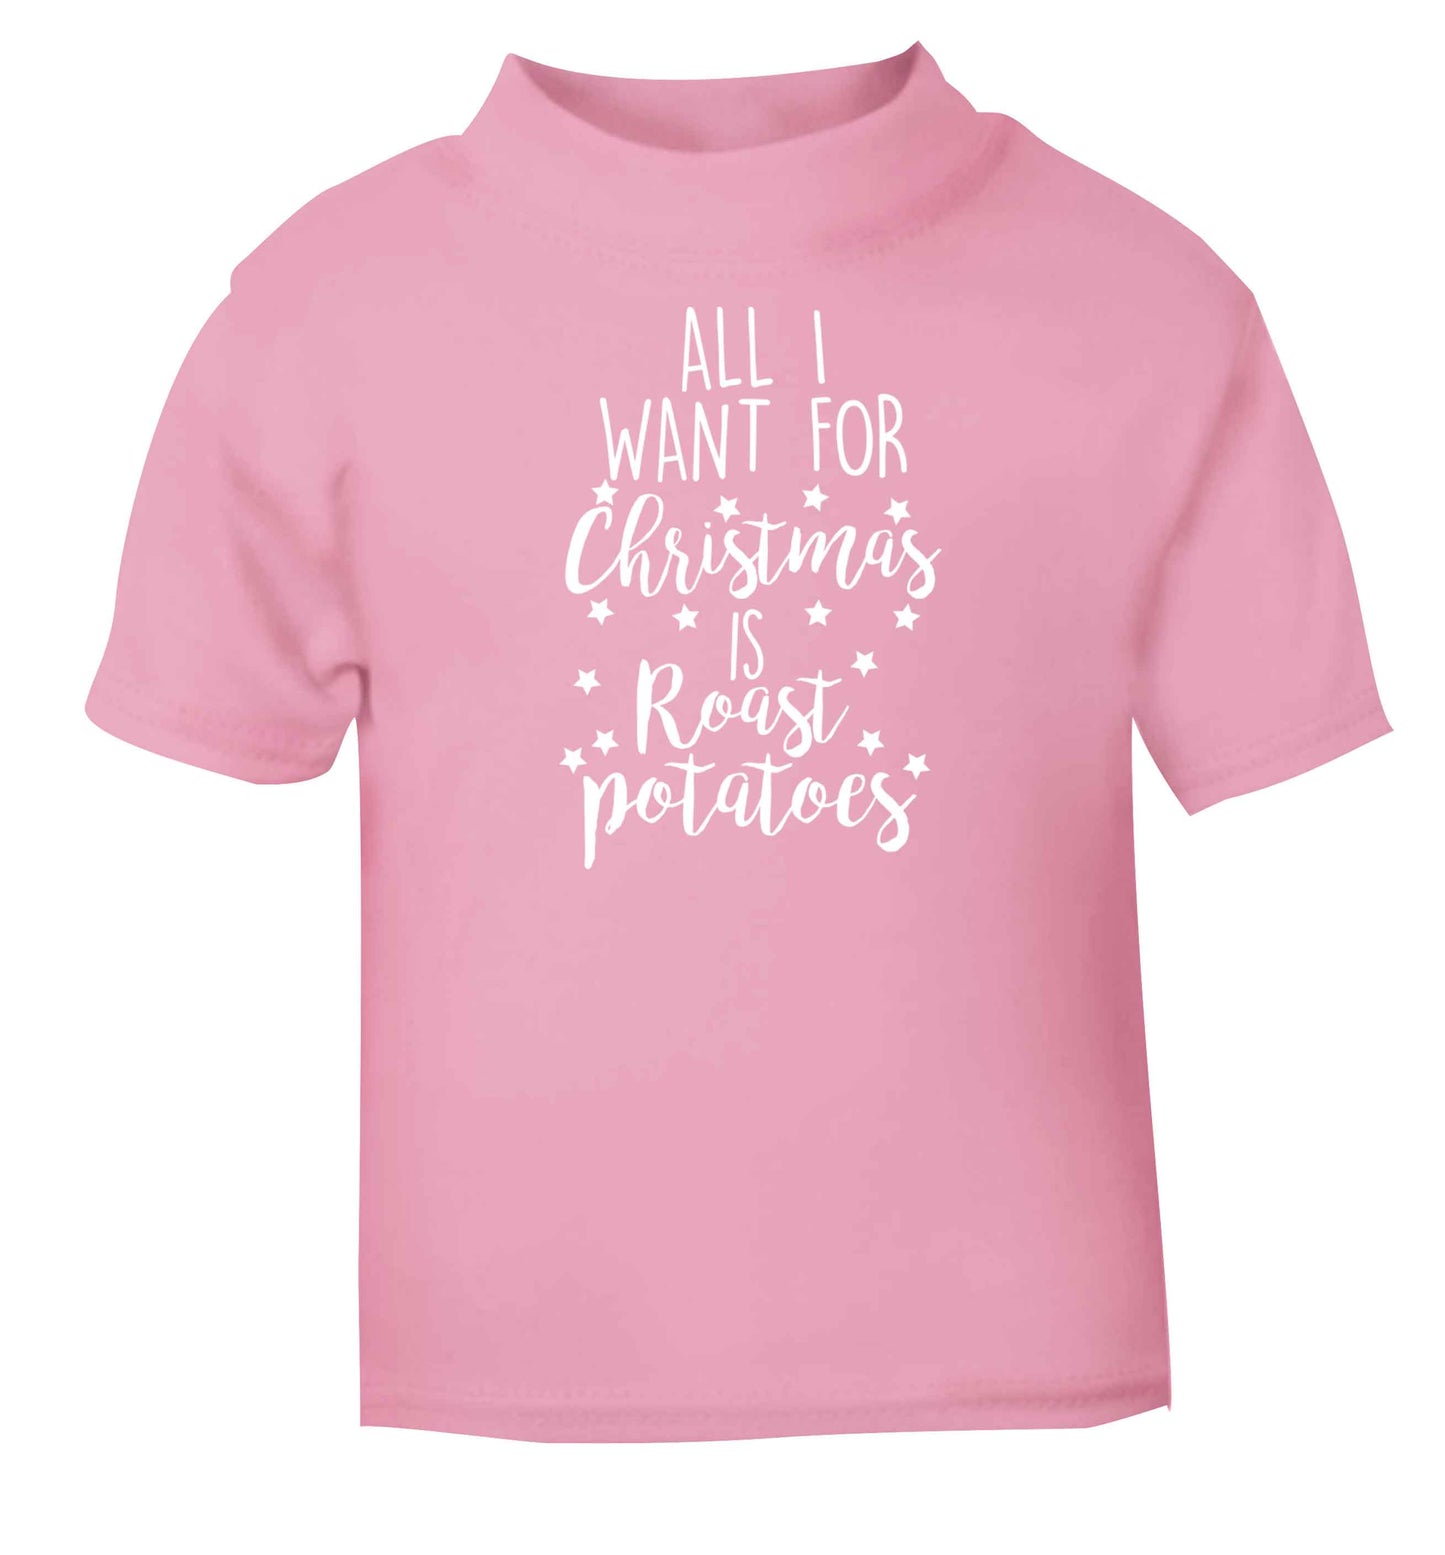 All I want for Christmas is roast potatoes light pink baby toddler Tshirt 2 Years